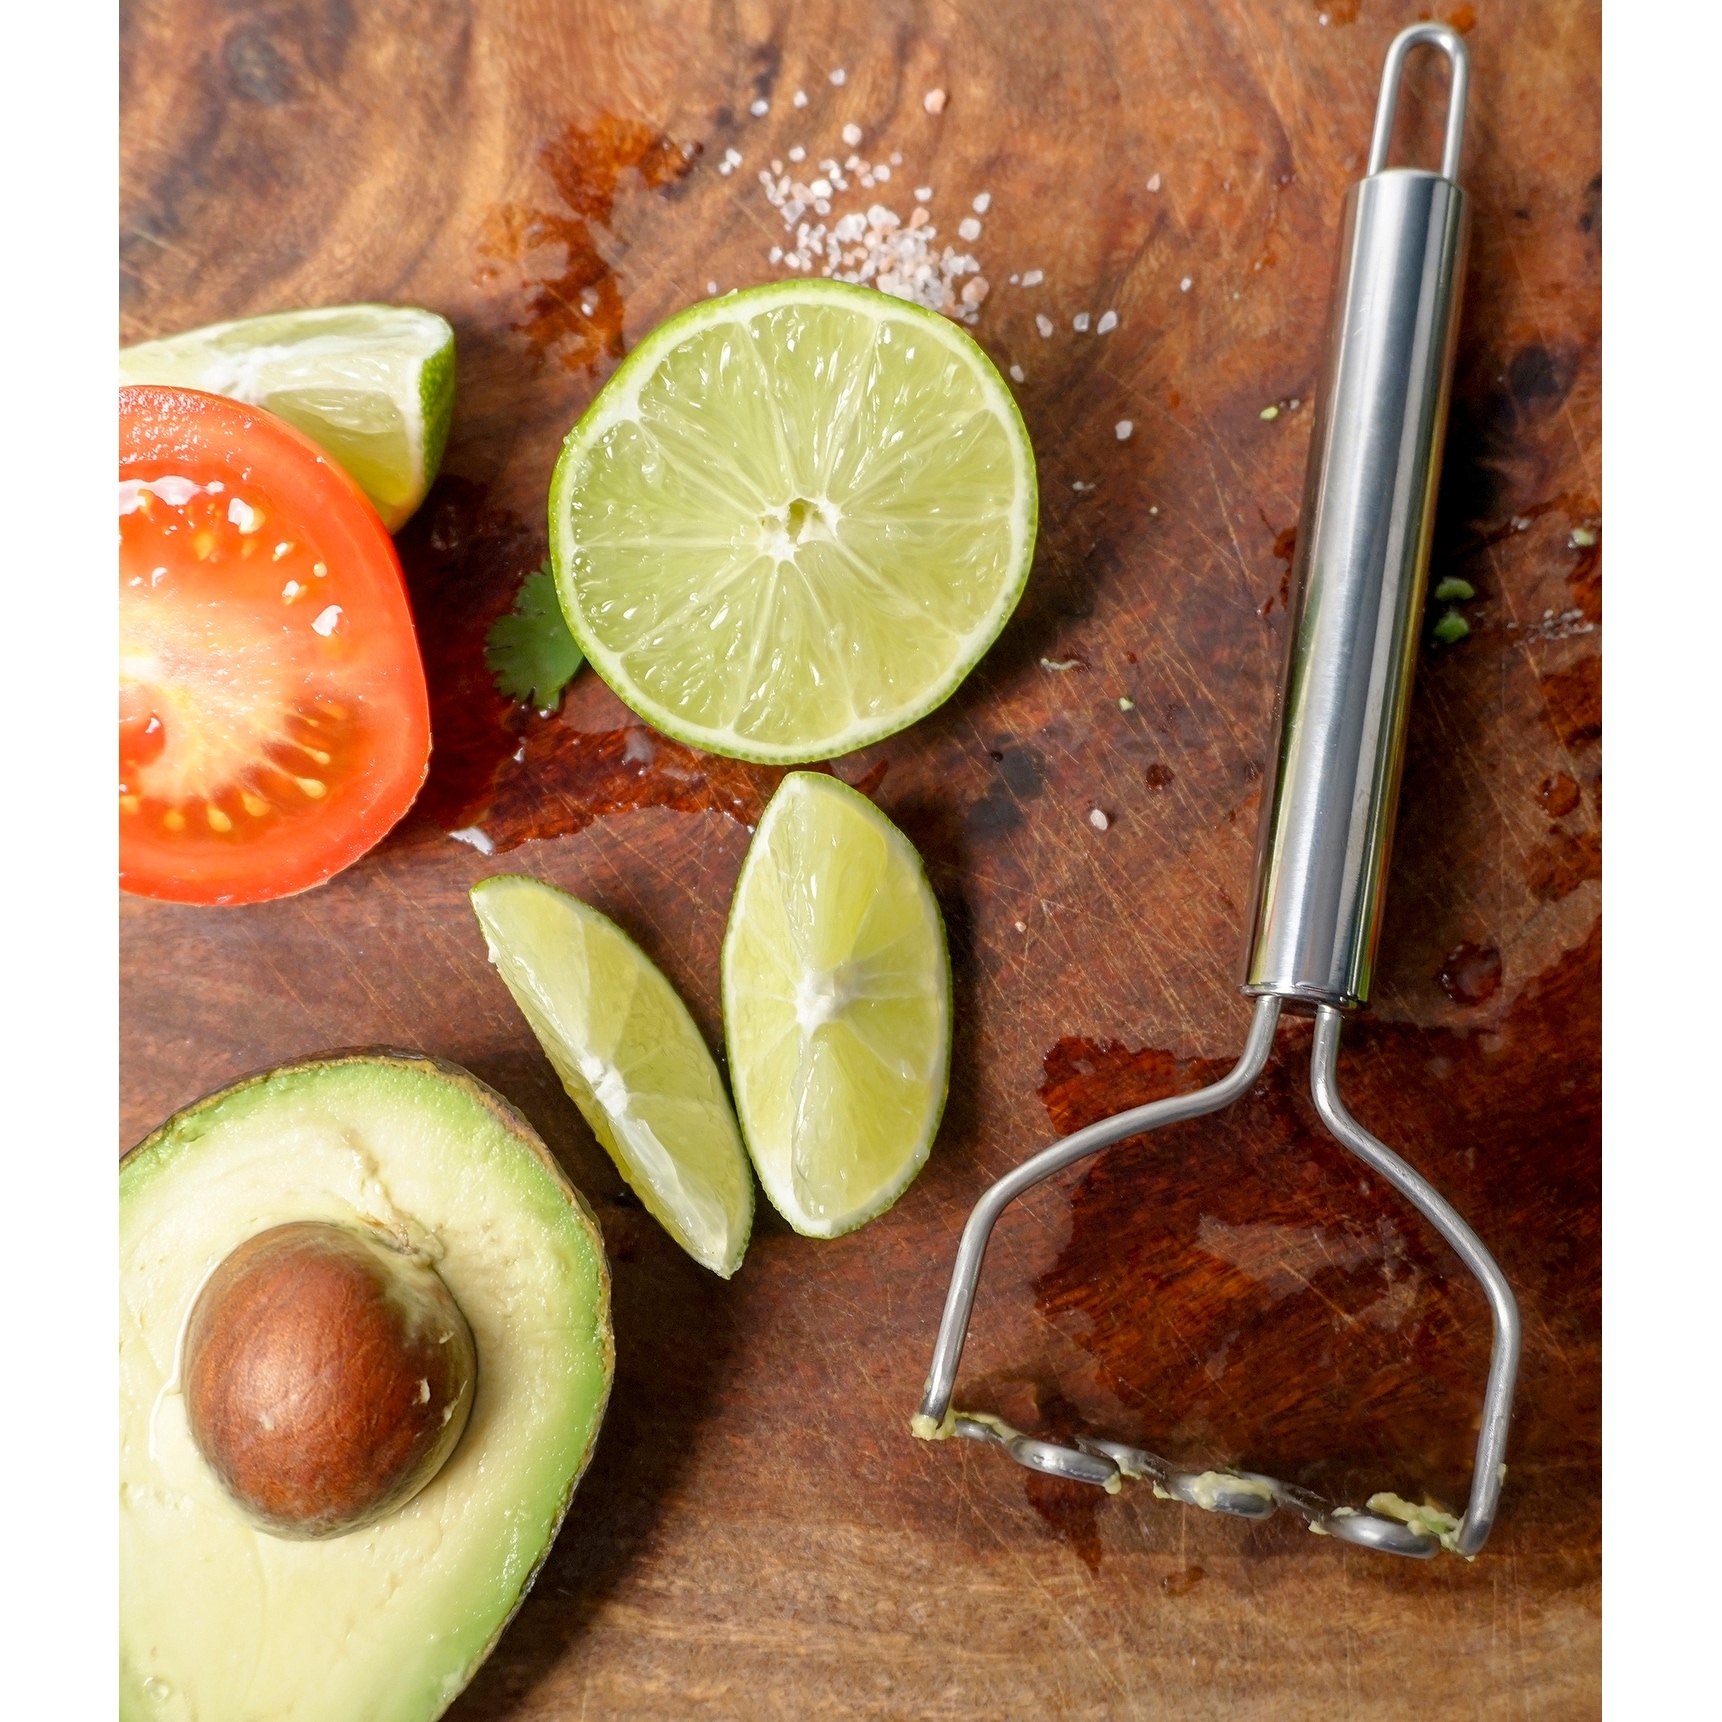 https://ak1.ostkcdn.com/images/products/is/images/direct/0bd5a7768bf1c522e92cb82bc017f1e6ee7bb083/Avocado-Masher.jpg